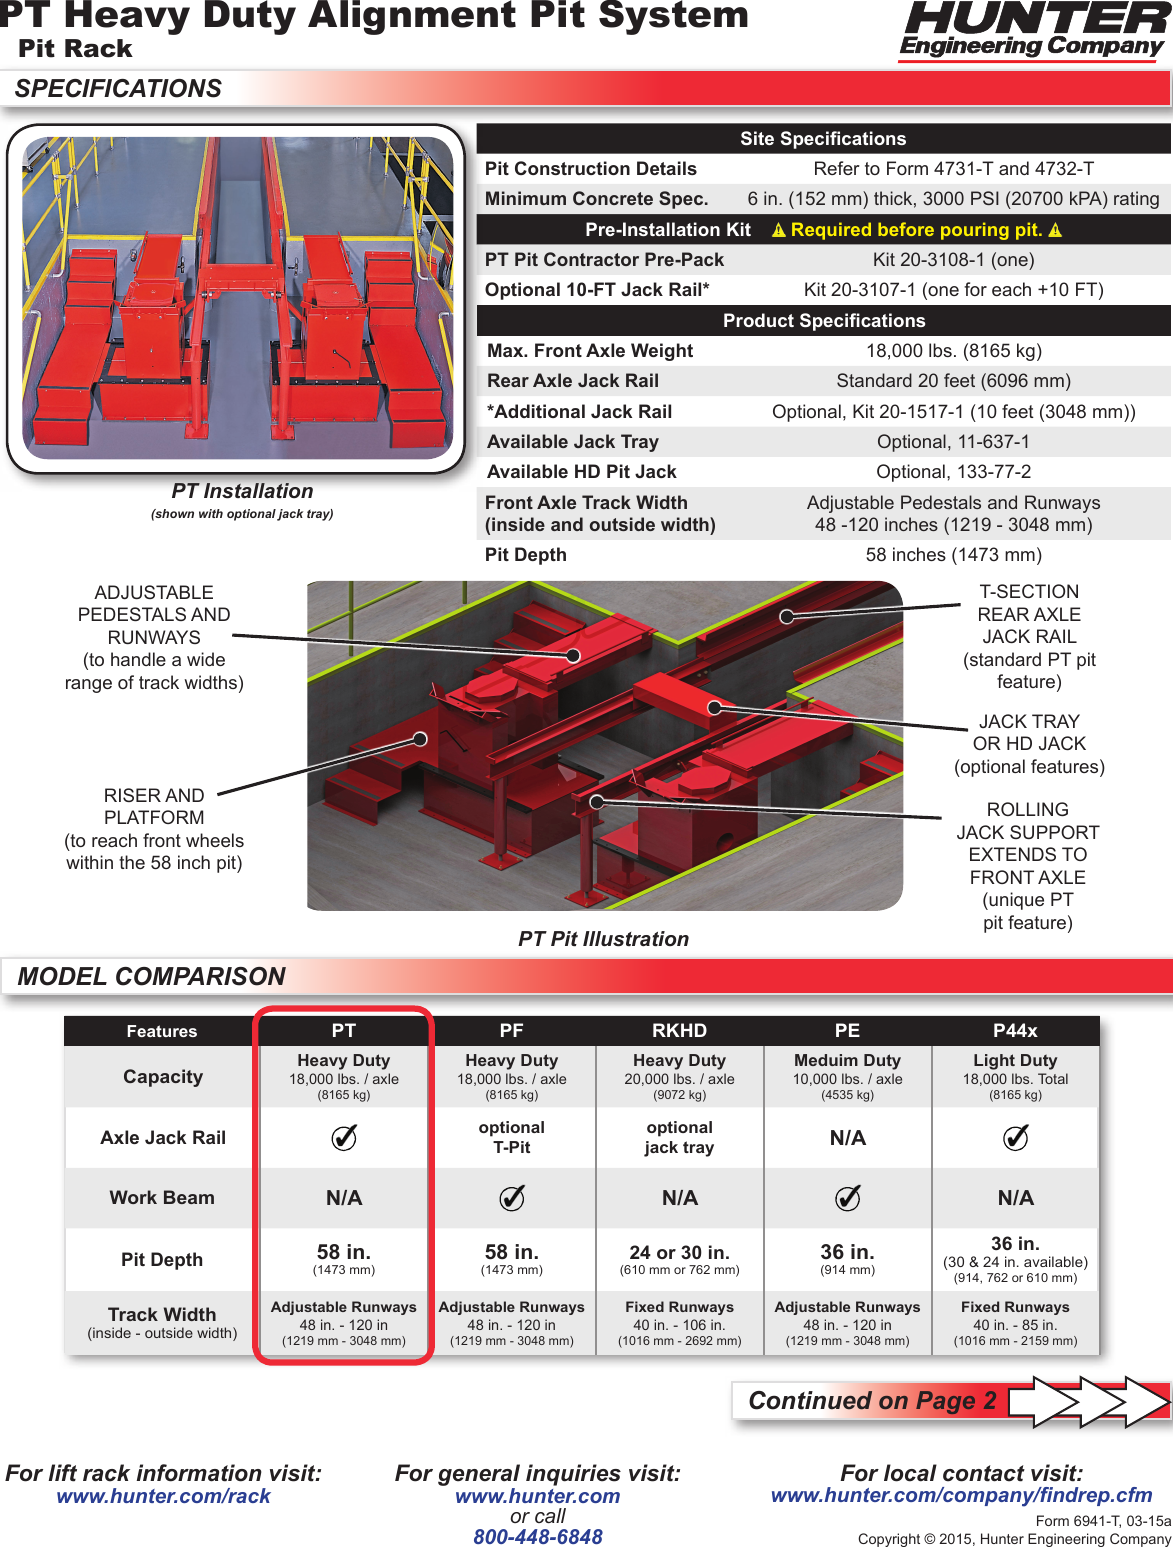 Page 1 of 2 - Hunter-Engineering Hunter-Engineering-Heavy-Duty-Specification-Sheet- PT Heavy-Duty Alignment Pit Spec Sheet (Site Requirements), Form 6941-T  Hunter-engineering-heavy-duty-specification-sheet